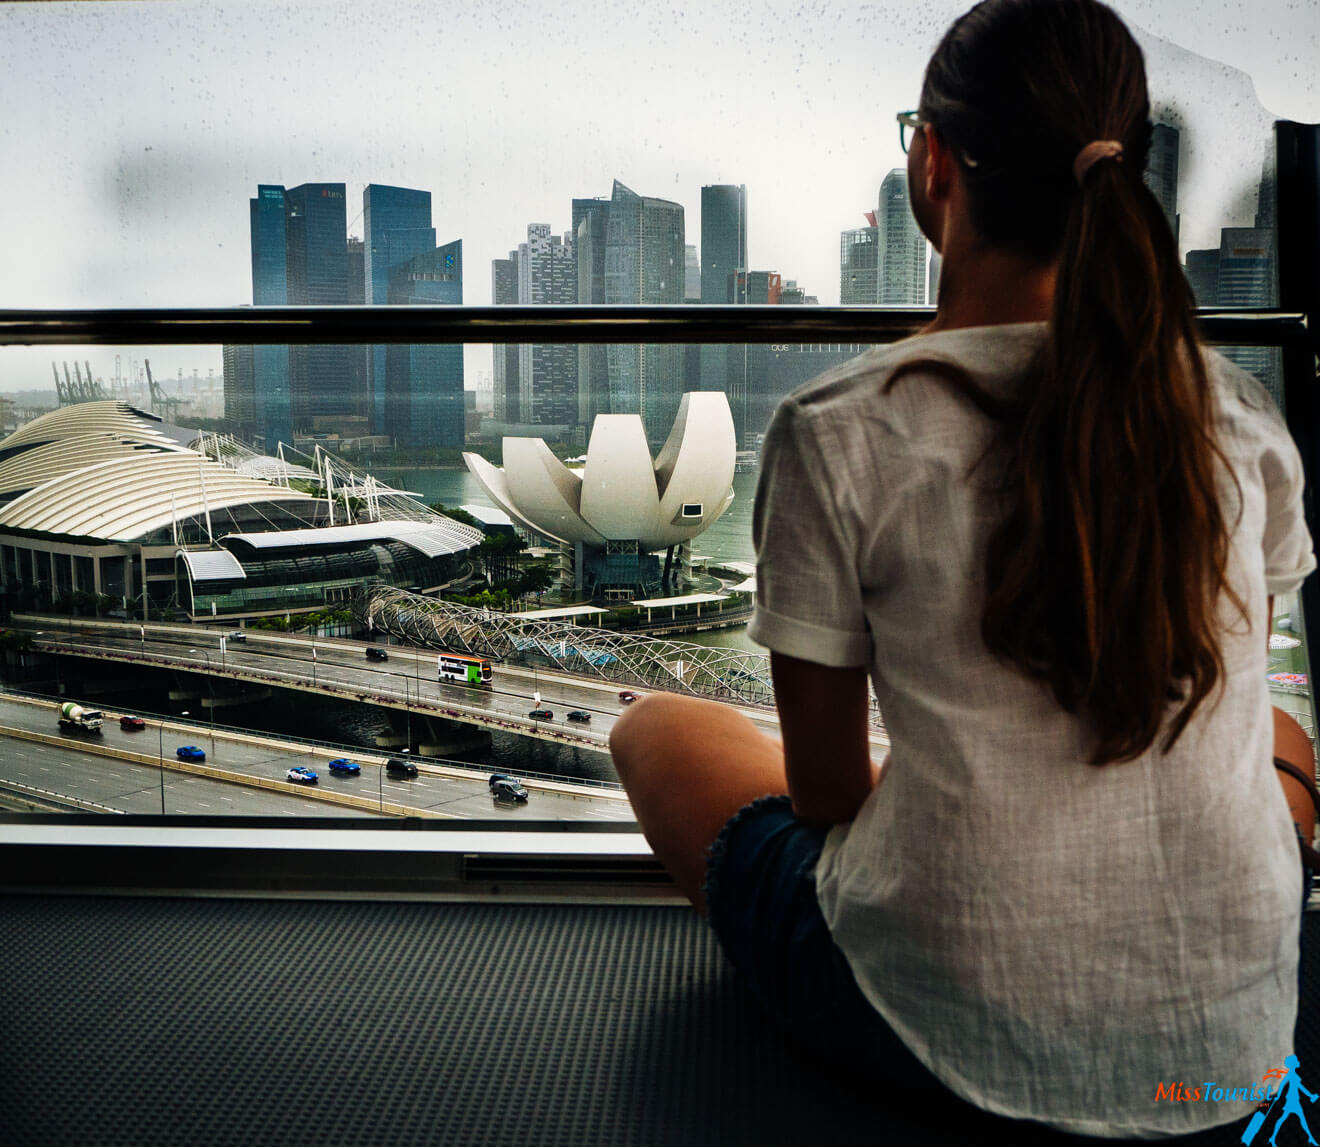 A woman looking out a window towards Singapore skyline